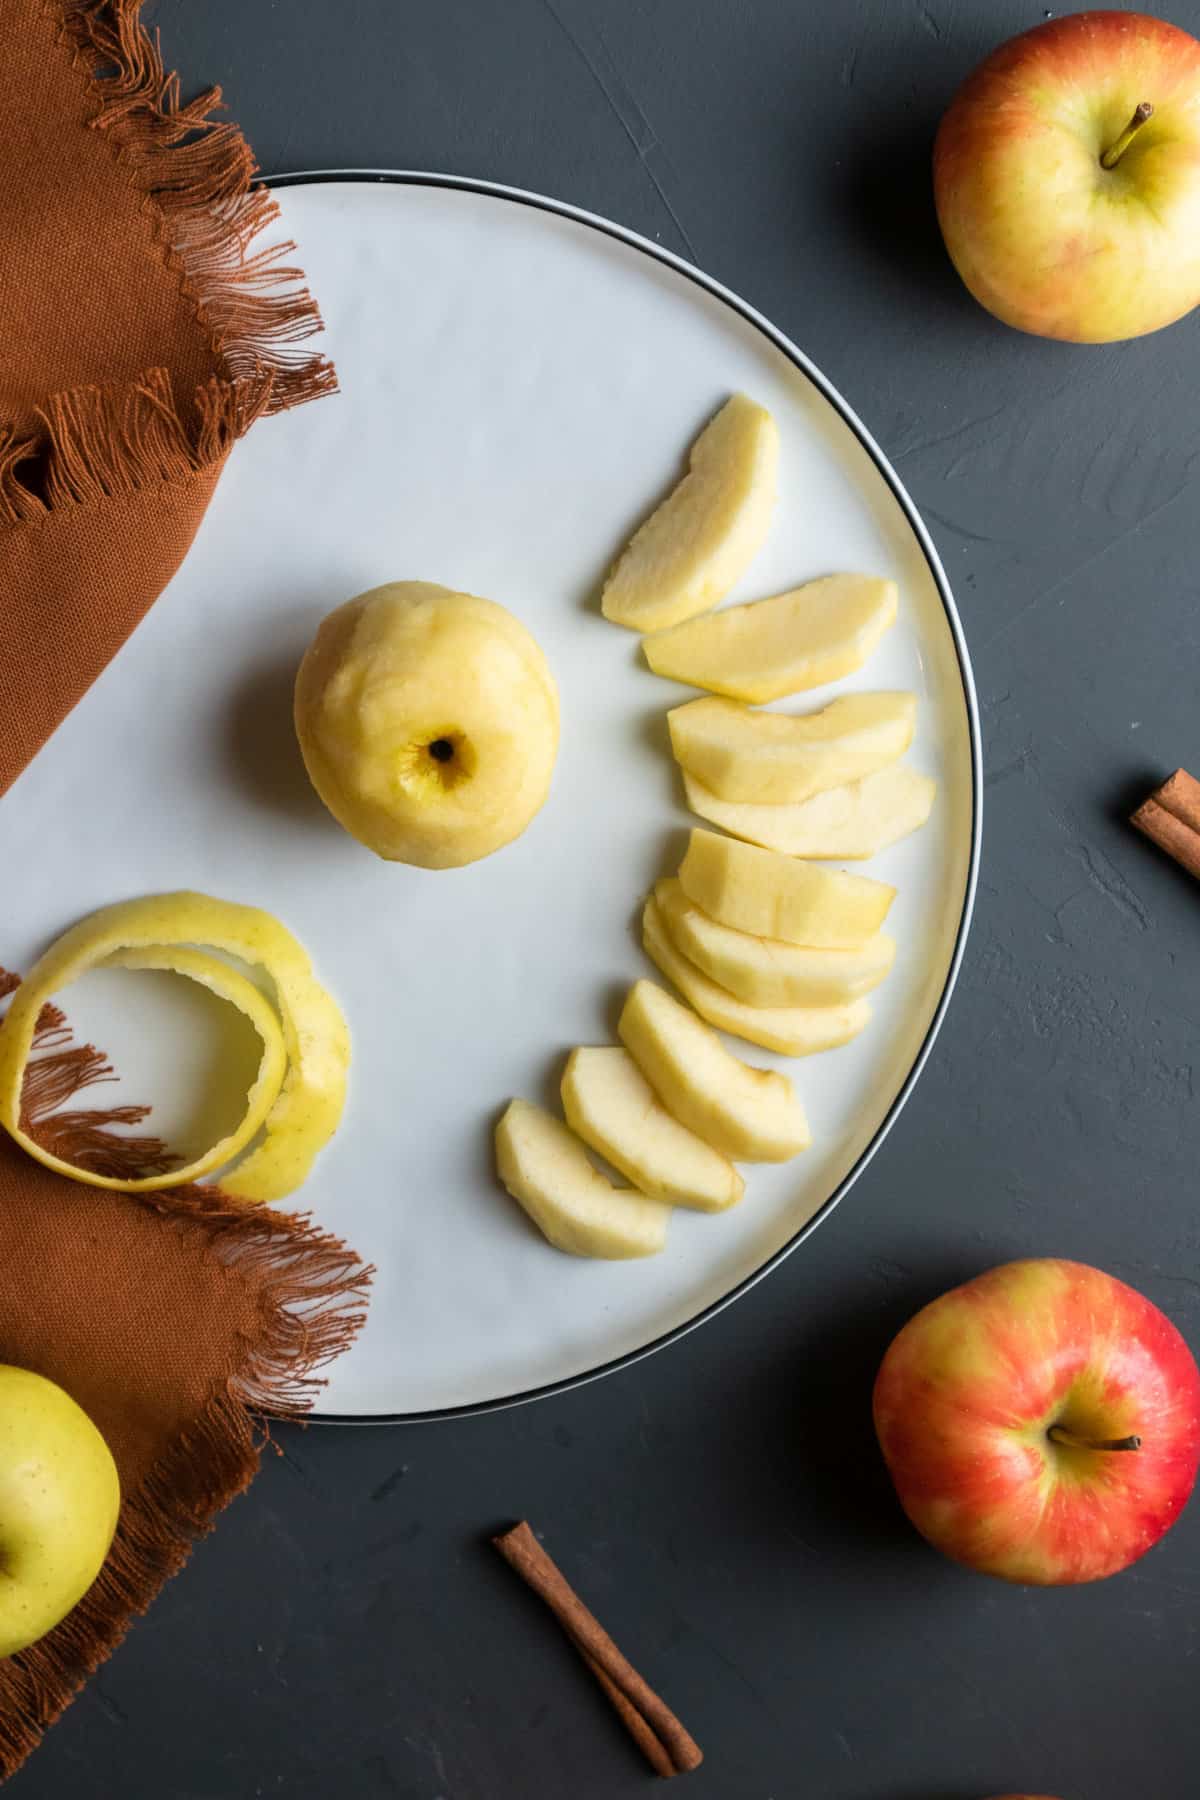 Peeled apples and apple slices on a plate